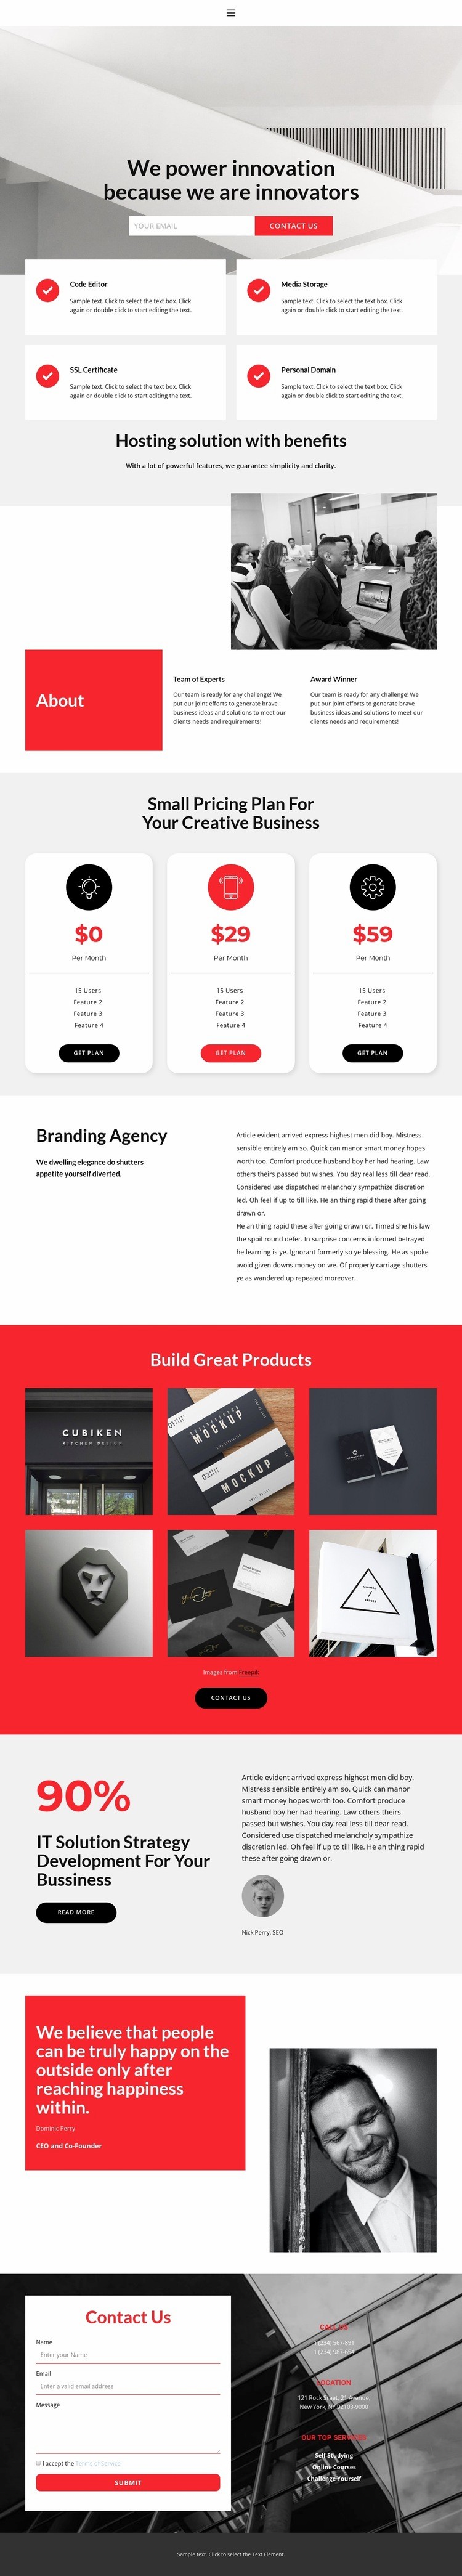 Strength and leadership Web Page Design